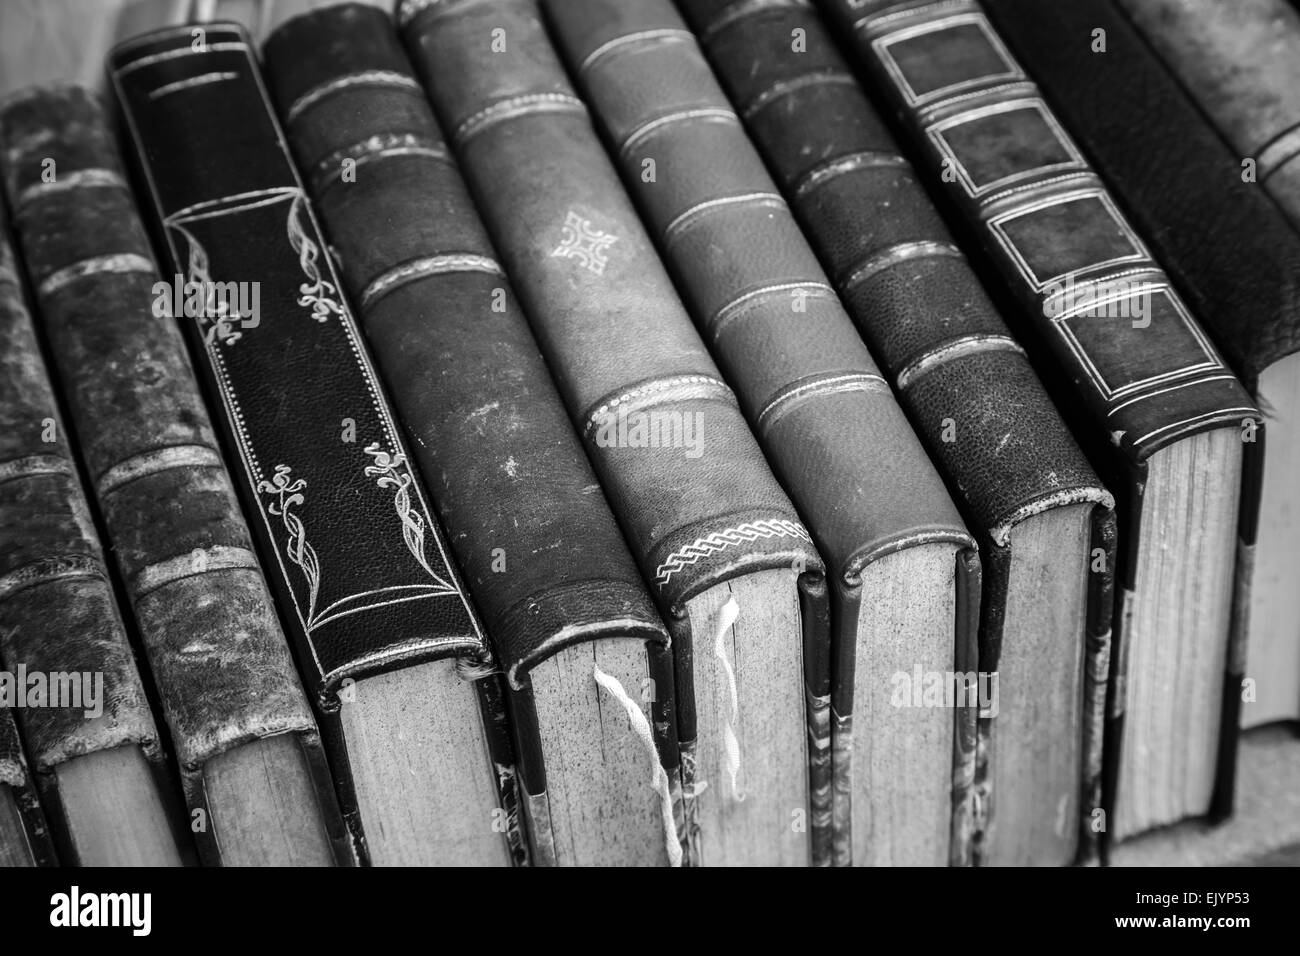 Old books with leather covers lay on the shelf, vintage stylized monochrome photo Stock Photo